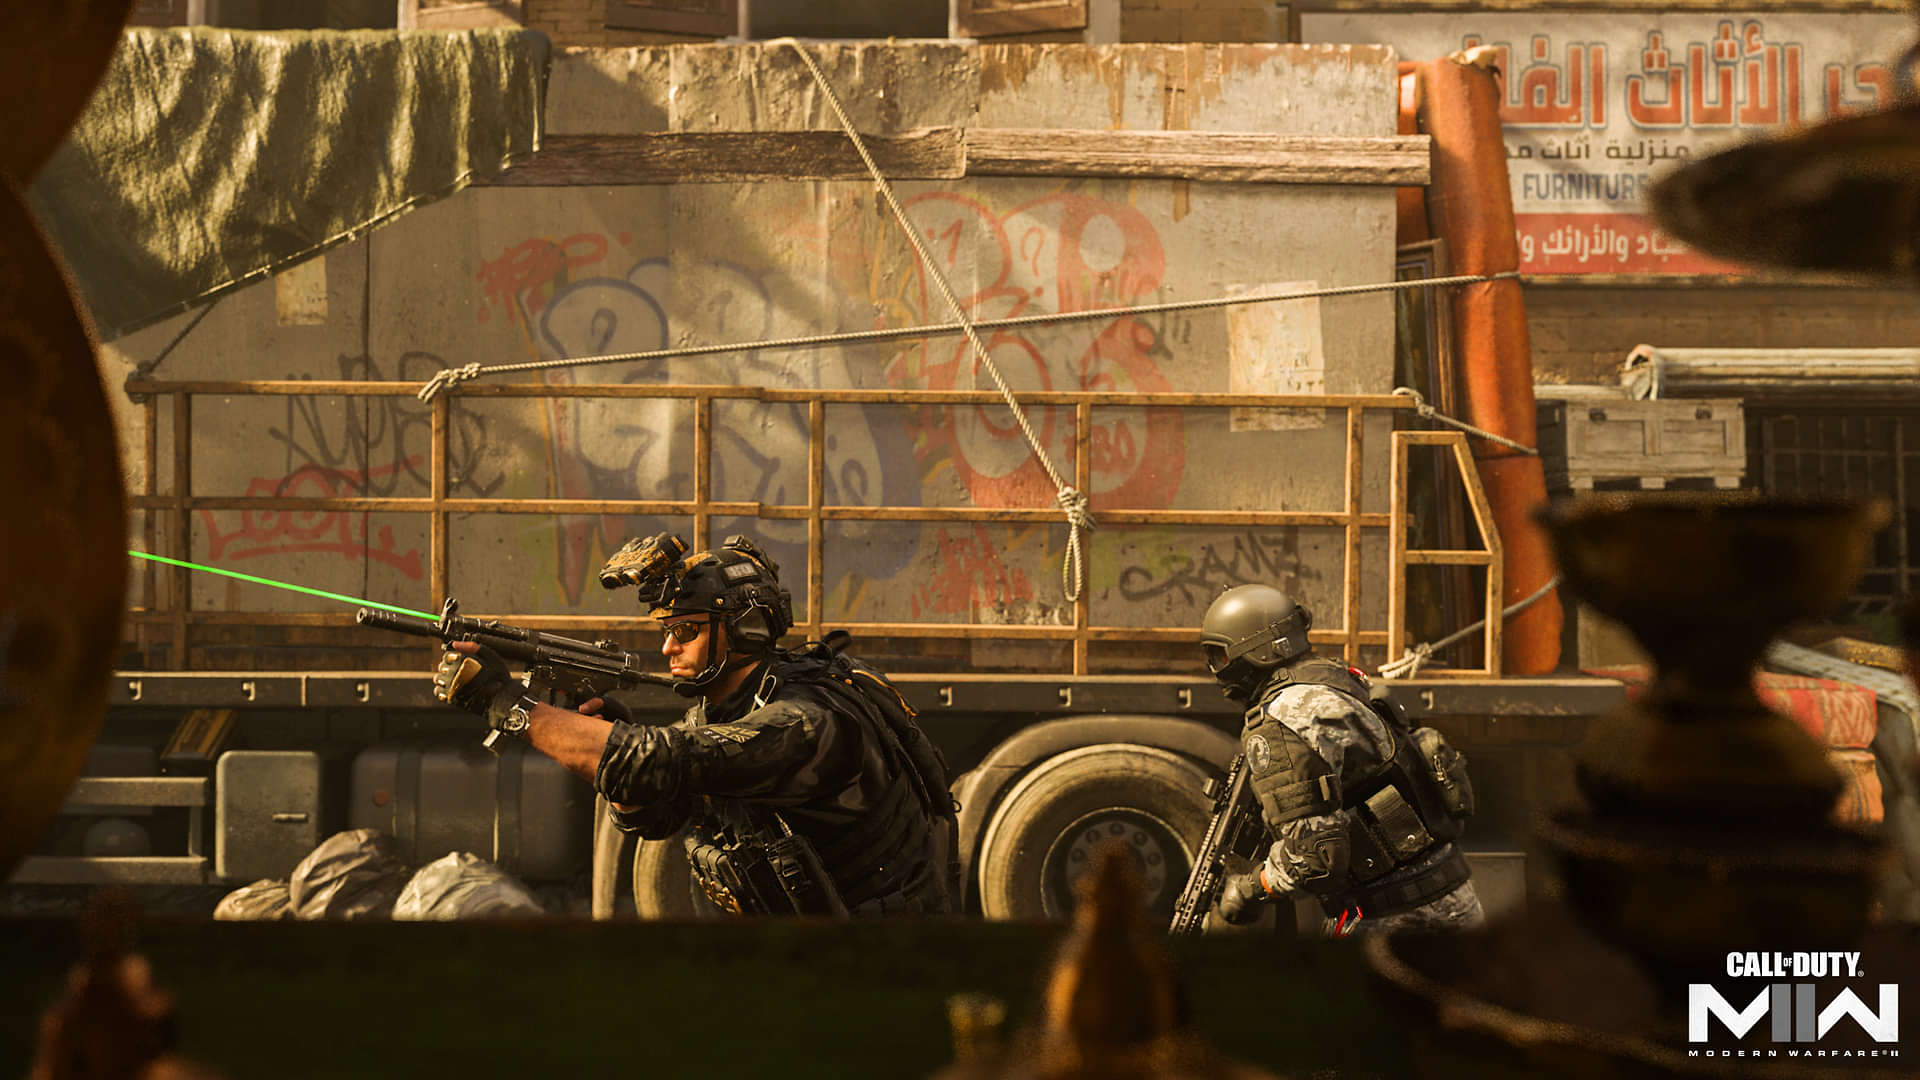 An image of soldiers in Warzone 2